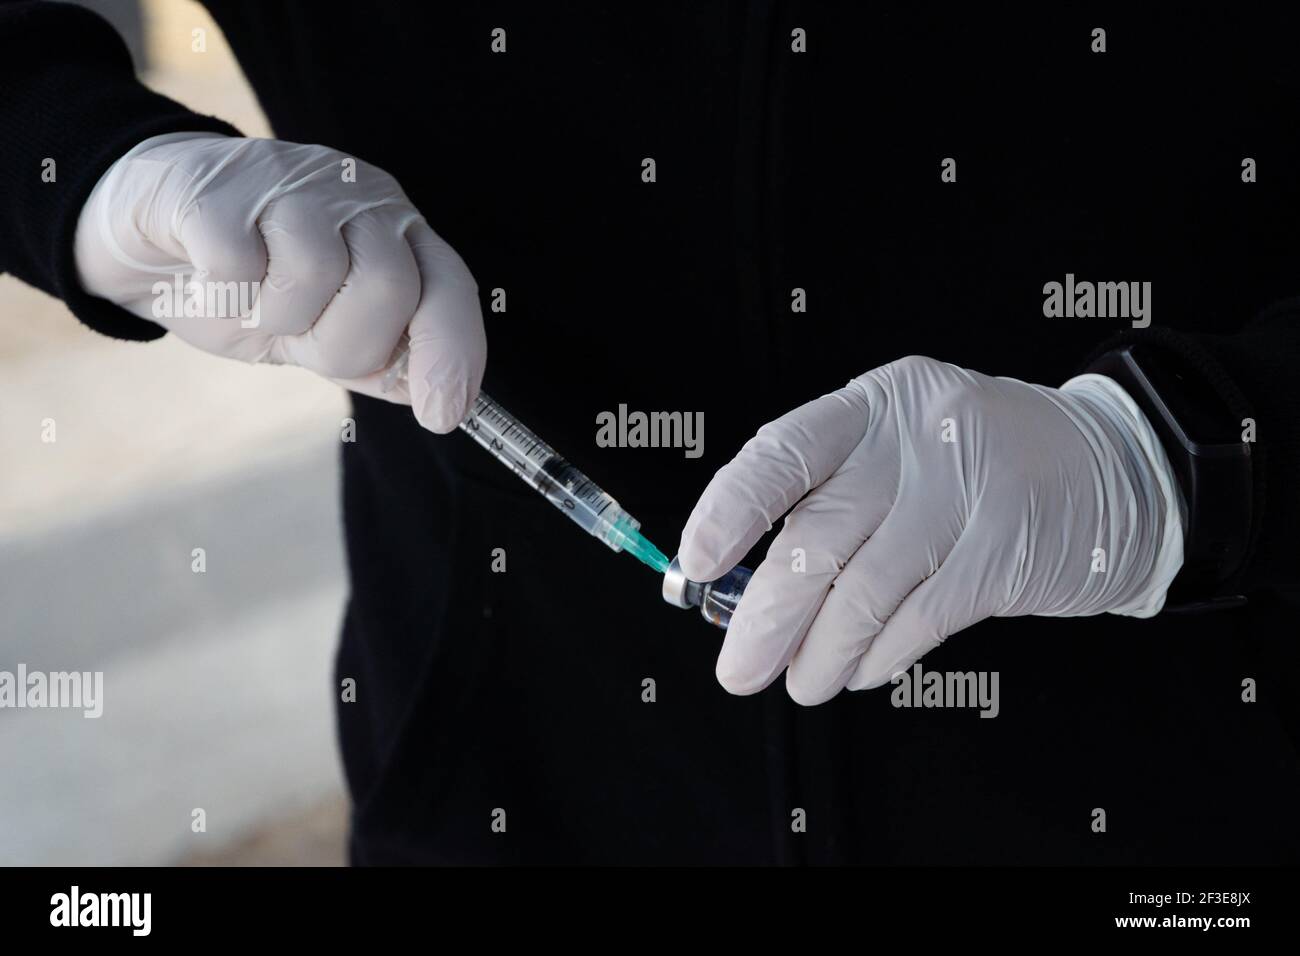 Santiago, Metropolitana, Chile. 16th Mar, 2021. A nurse prepares a dose of the Sinovac vaccine for Covid-19. So far, almost 5 million people have been vaccinated in the country, and 41% of them with the second dose. Credit: Matias Basualdo/ZUMA Wire/Alamy Live News Stock Photo